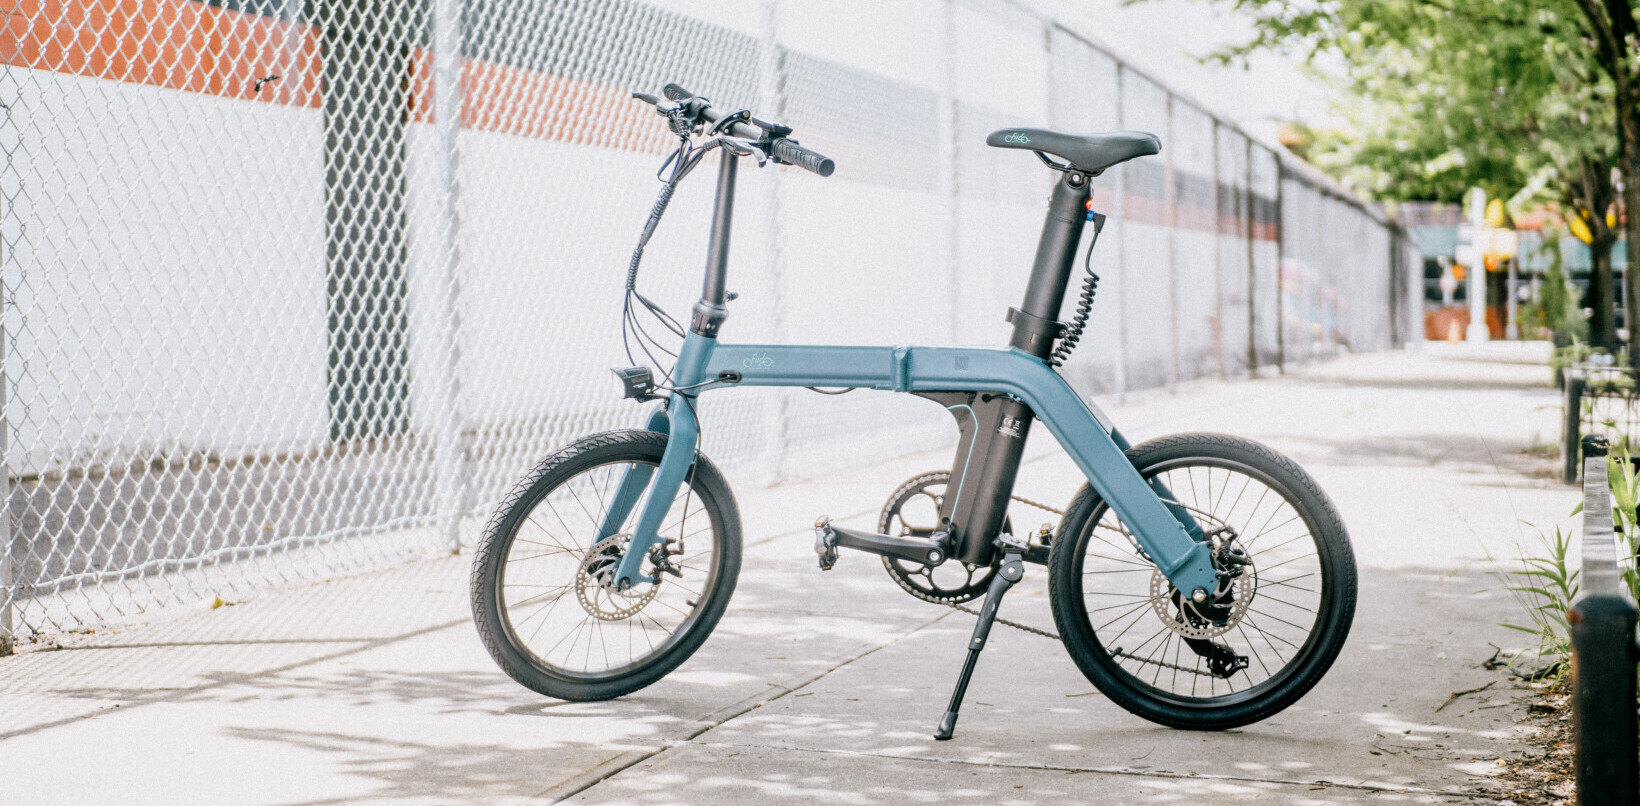 Fiido D11 review: This folding ebike has good looks, low weight, and solid range